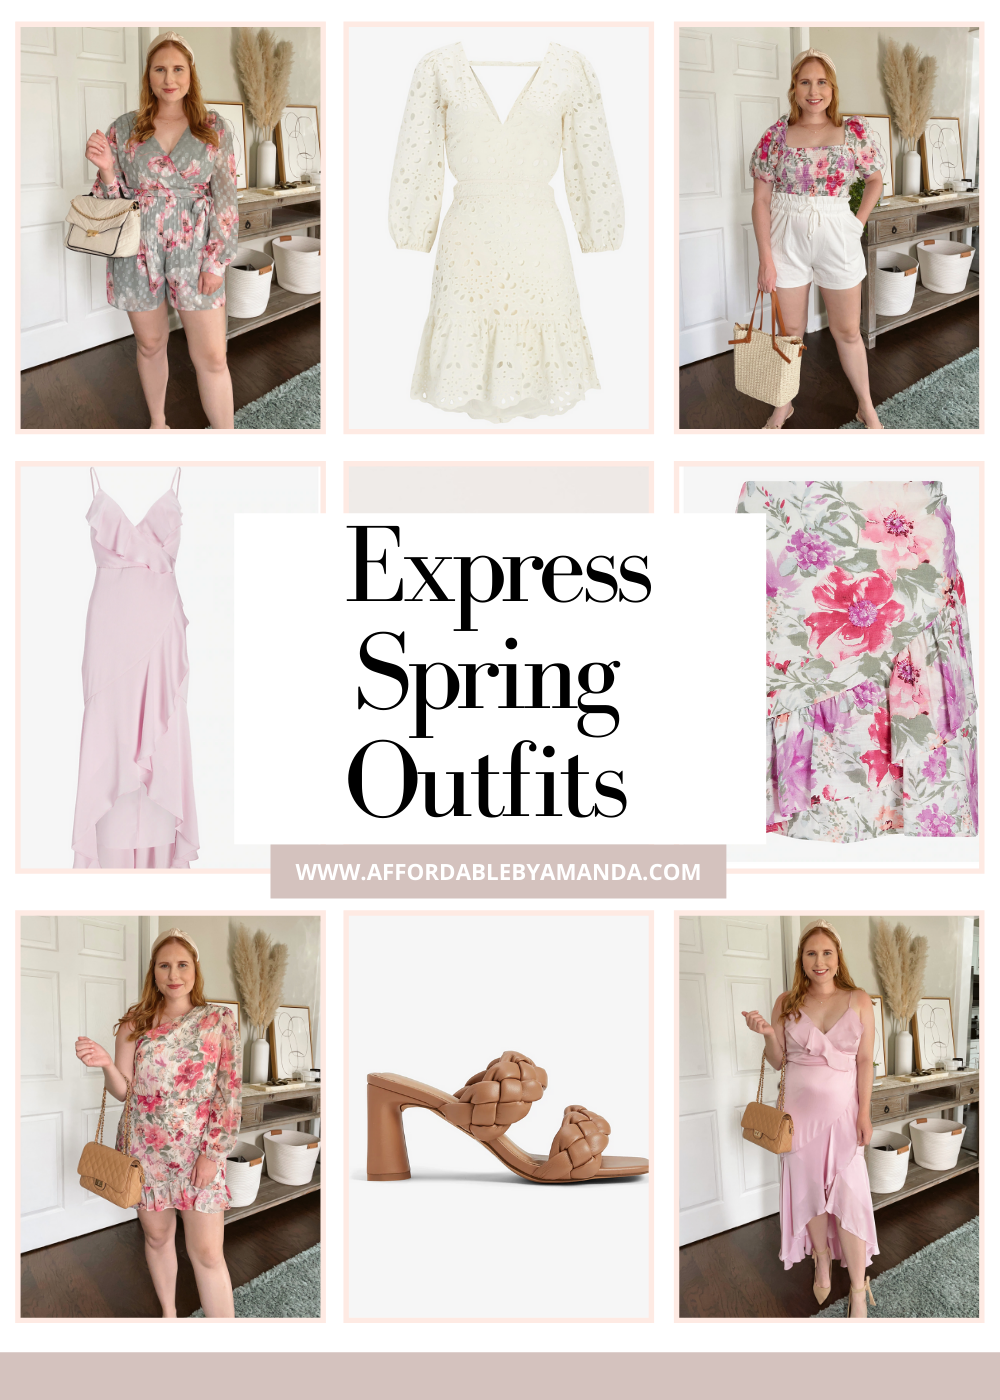 Spring Outfits from Express - Express Spring Dresses 2022 - Affordable by Amanda 